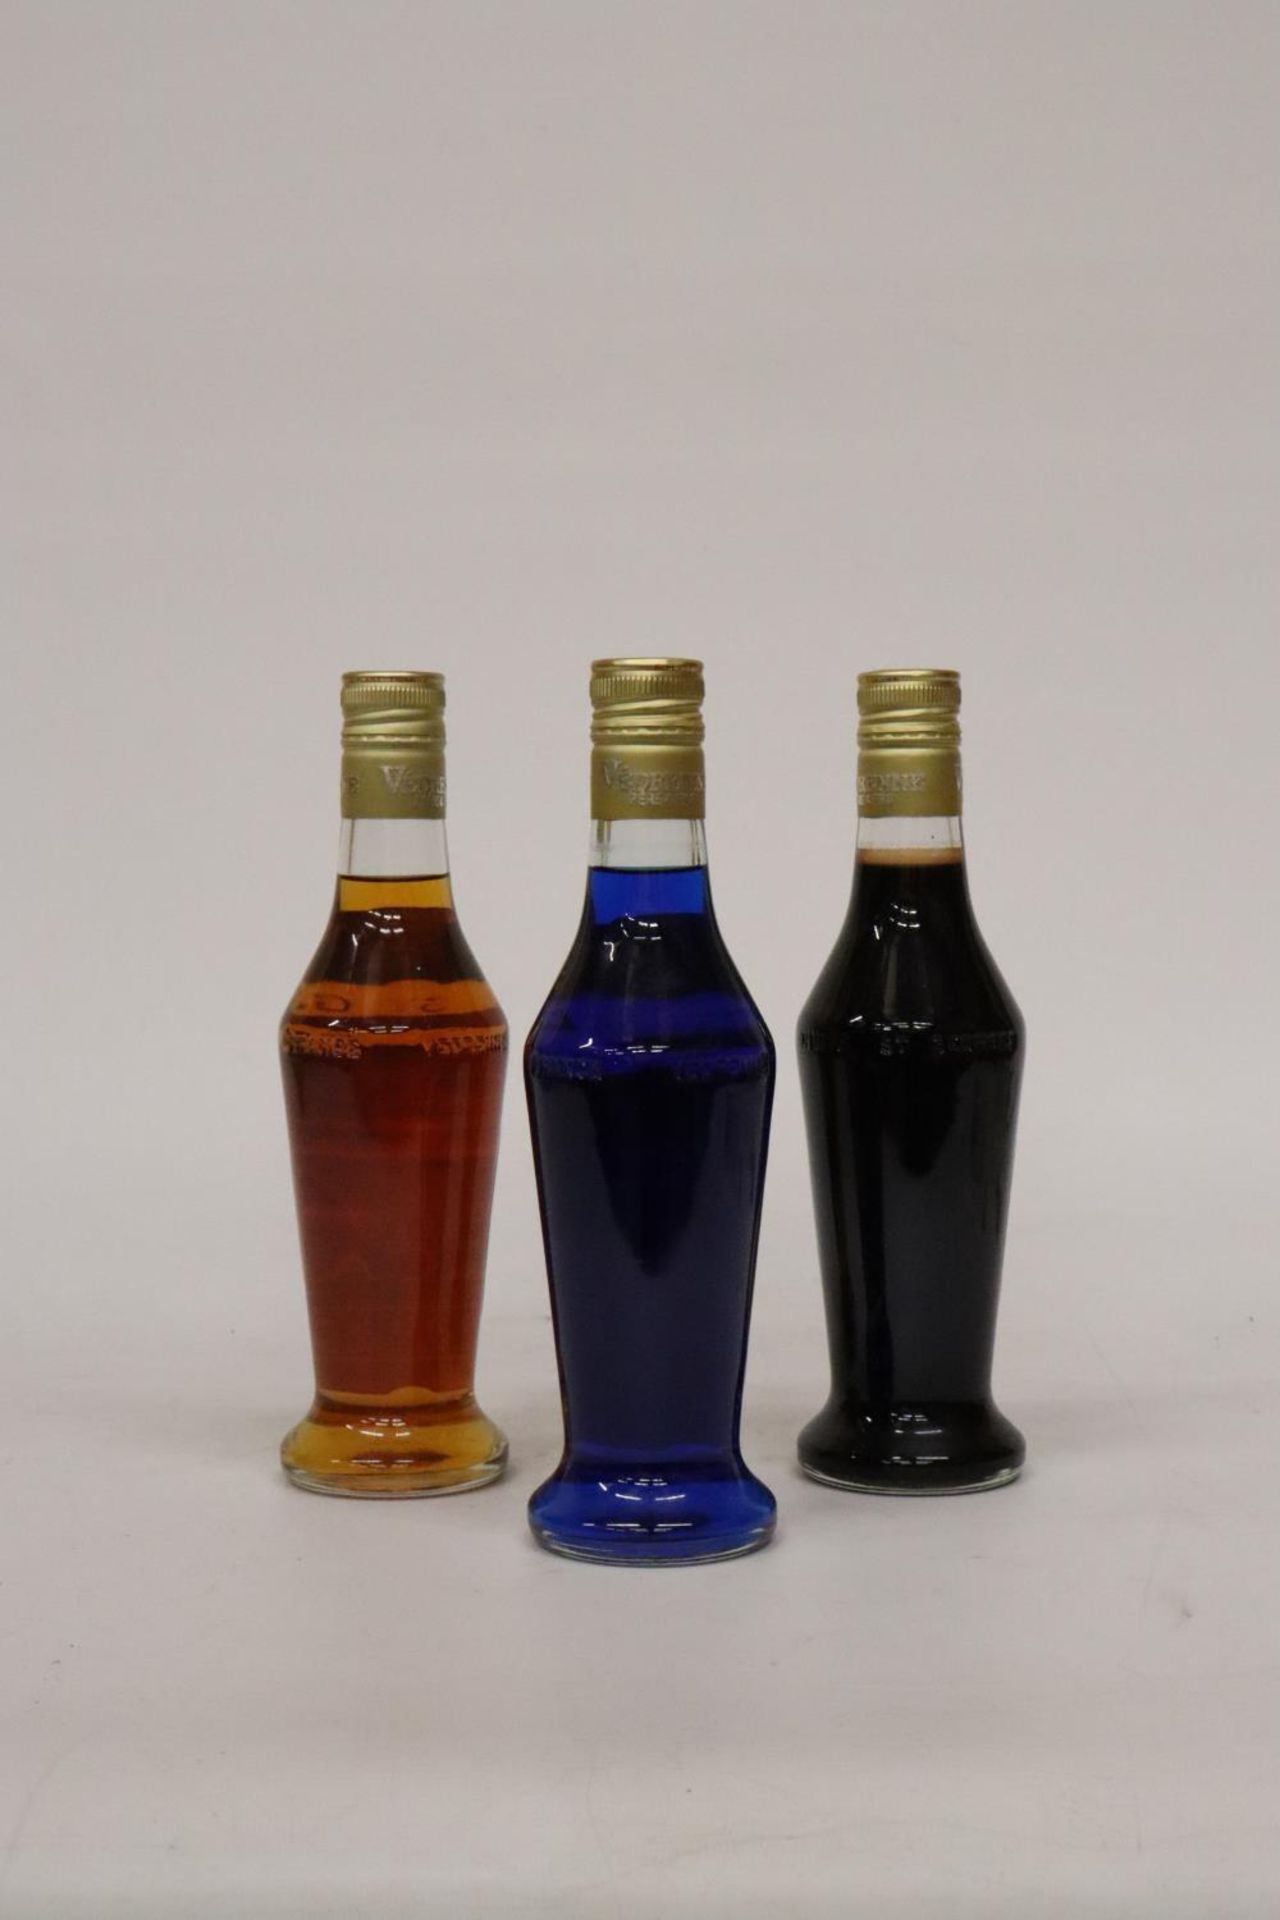 THREE BOTTLES OF VEDRENNE LIQUEUR TO INCLUDE A CURACOA BLEU, A CREME DE CACOA AND A FRAMBOISE - Image 2 of 3